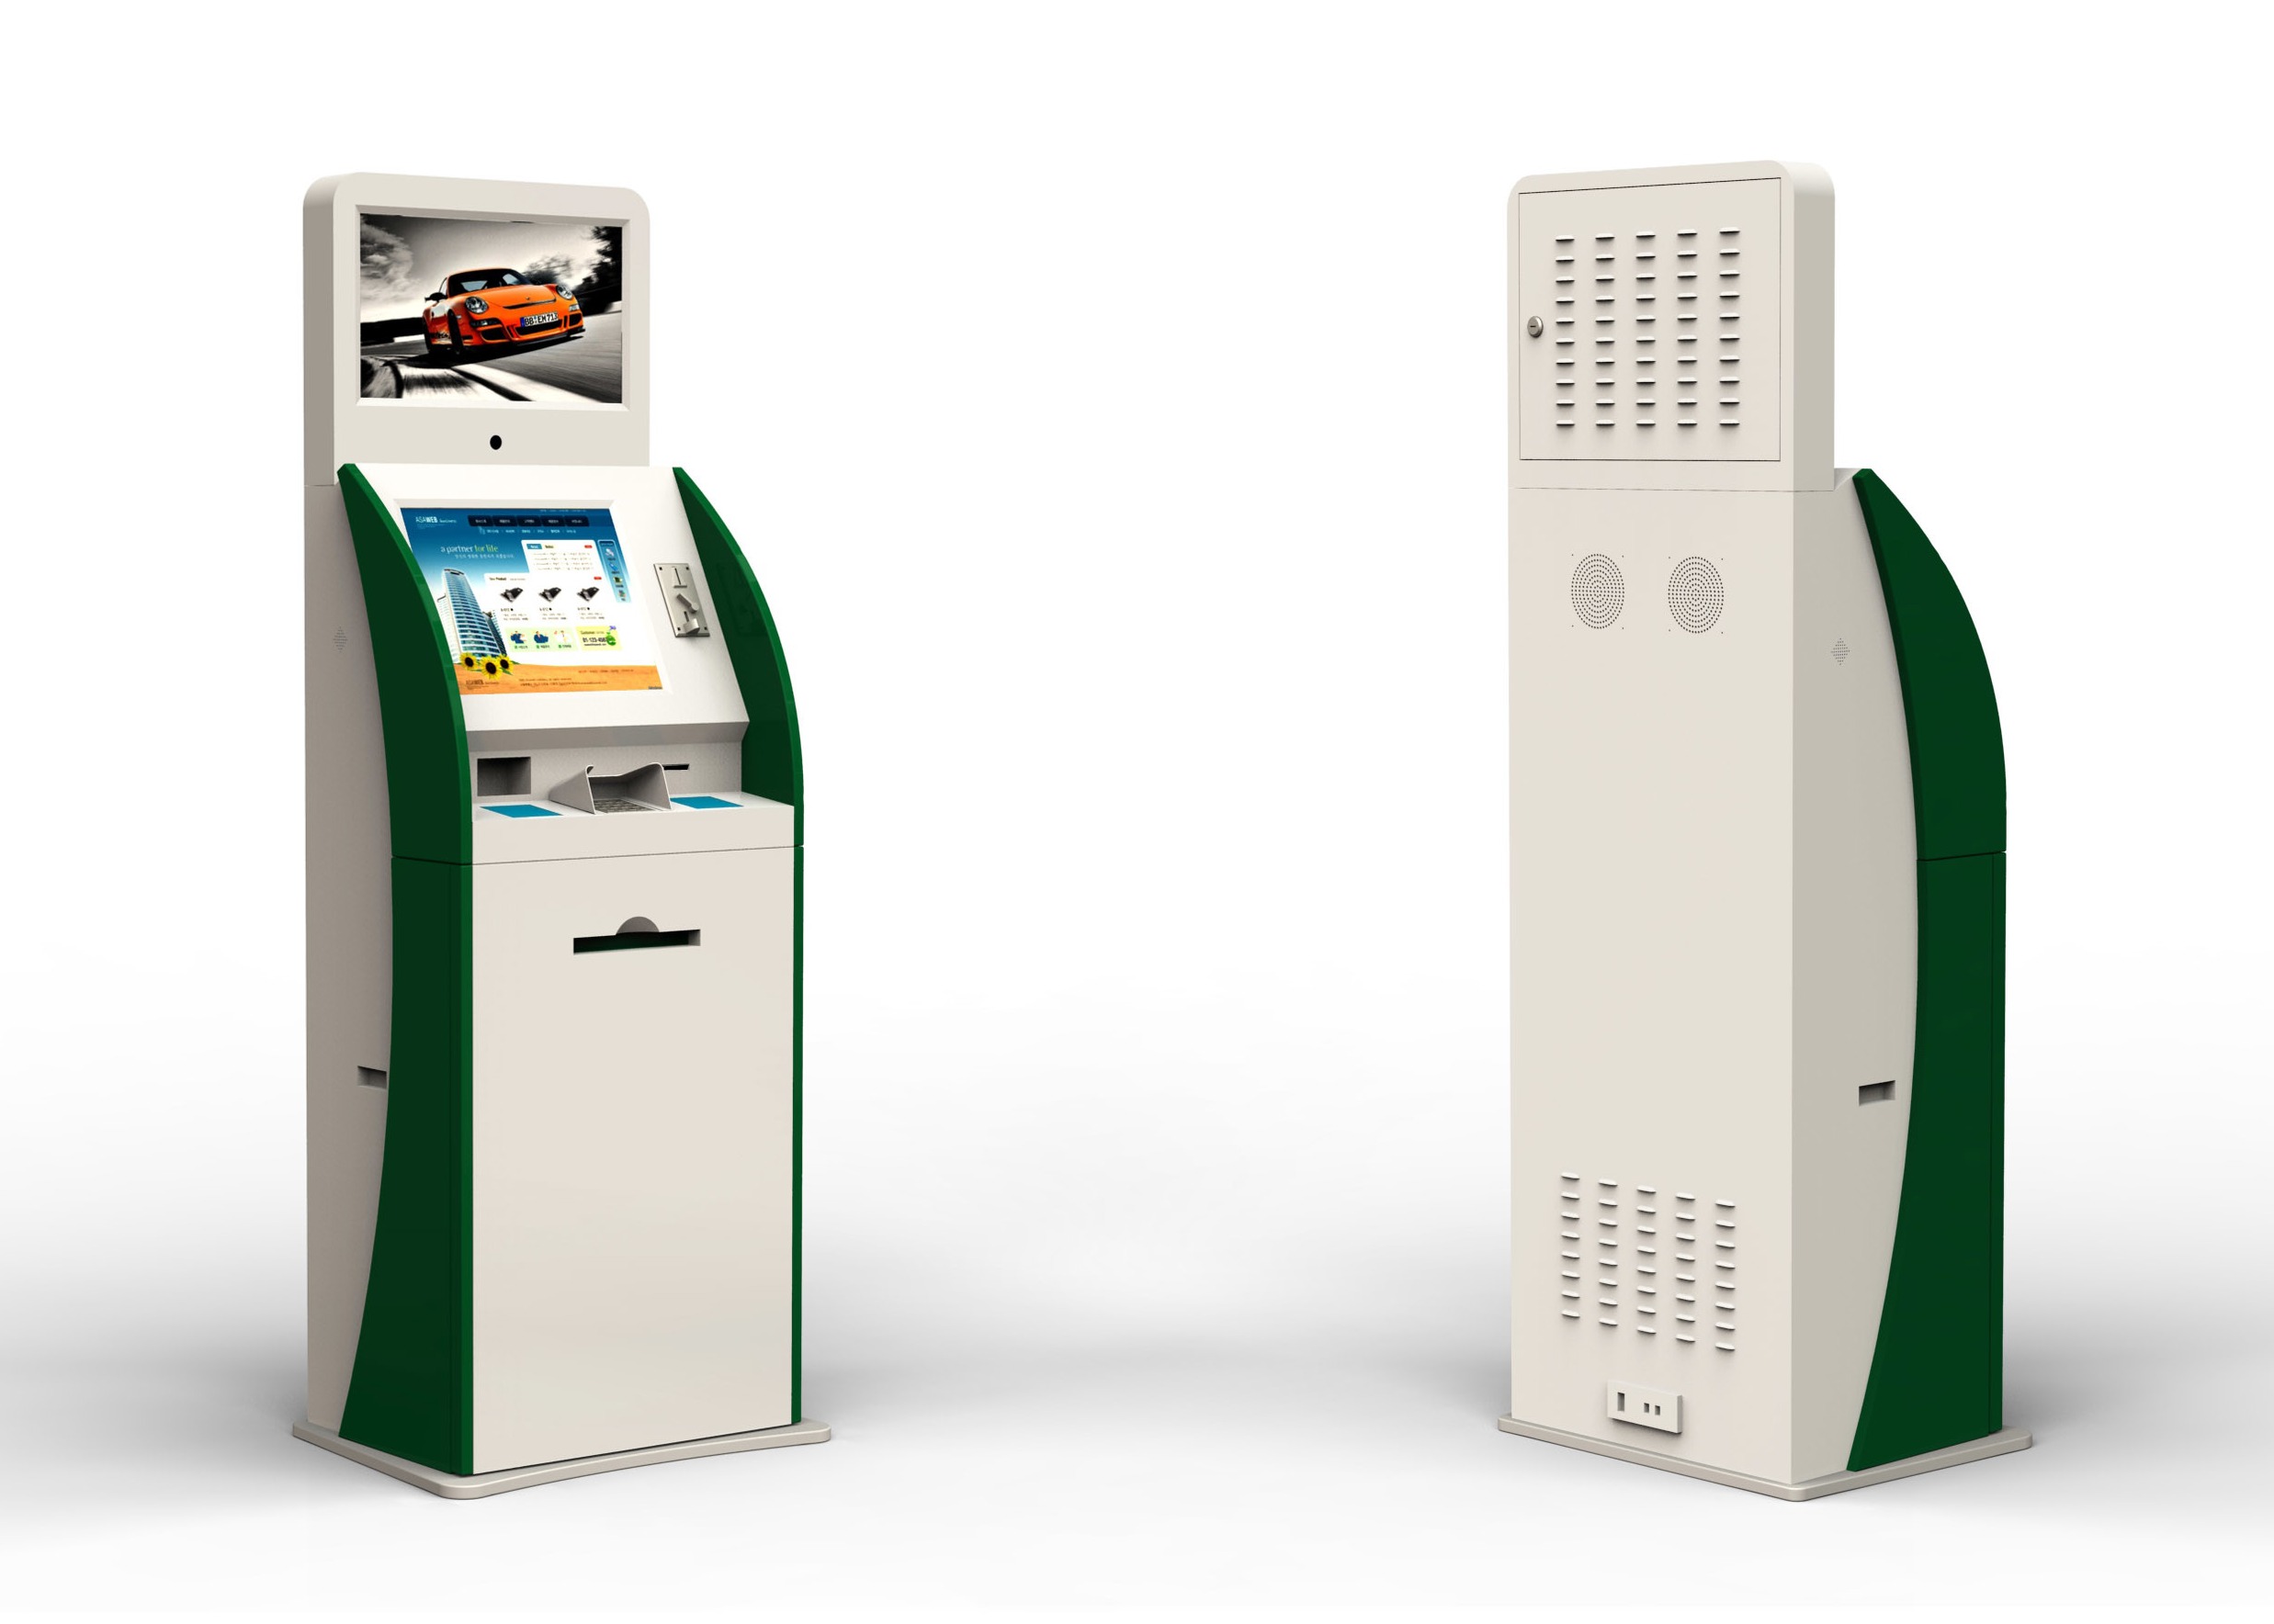 China Anti - Fishing Self Service Kiosk Machine Payment Cash On Delivery/Self-Service Kiosk for Banks,ATM kiosk with Cash on sale